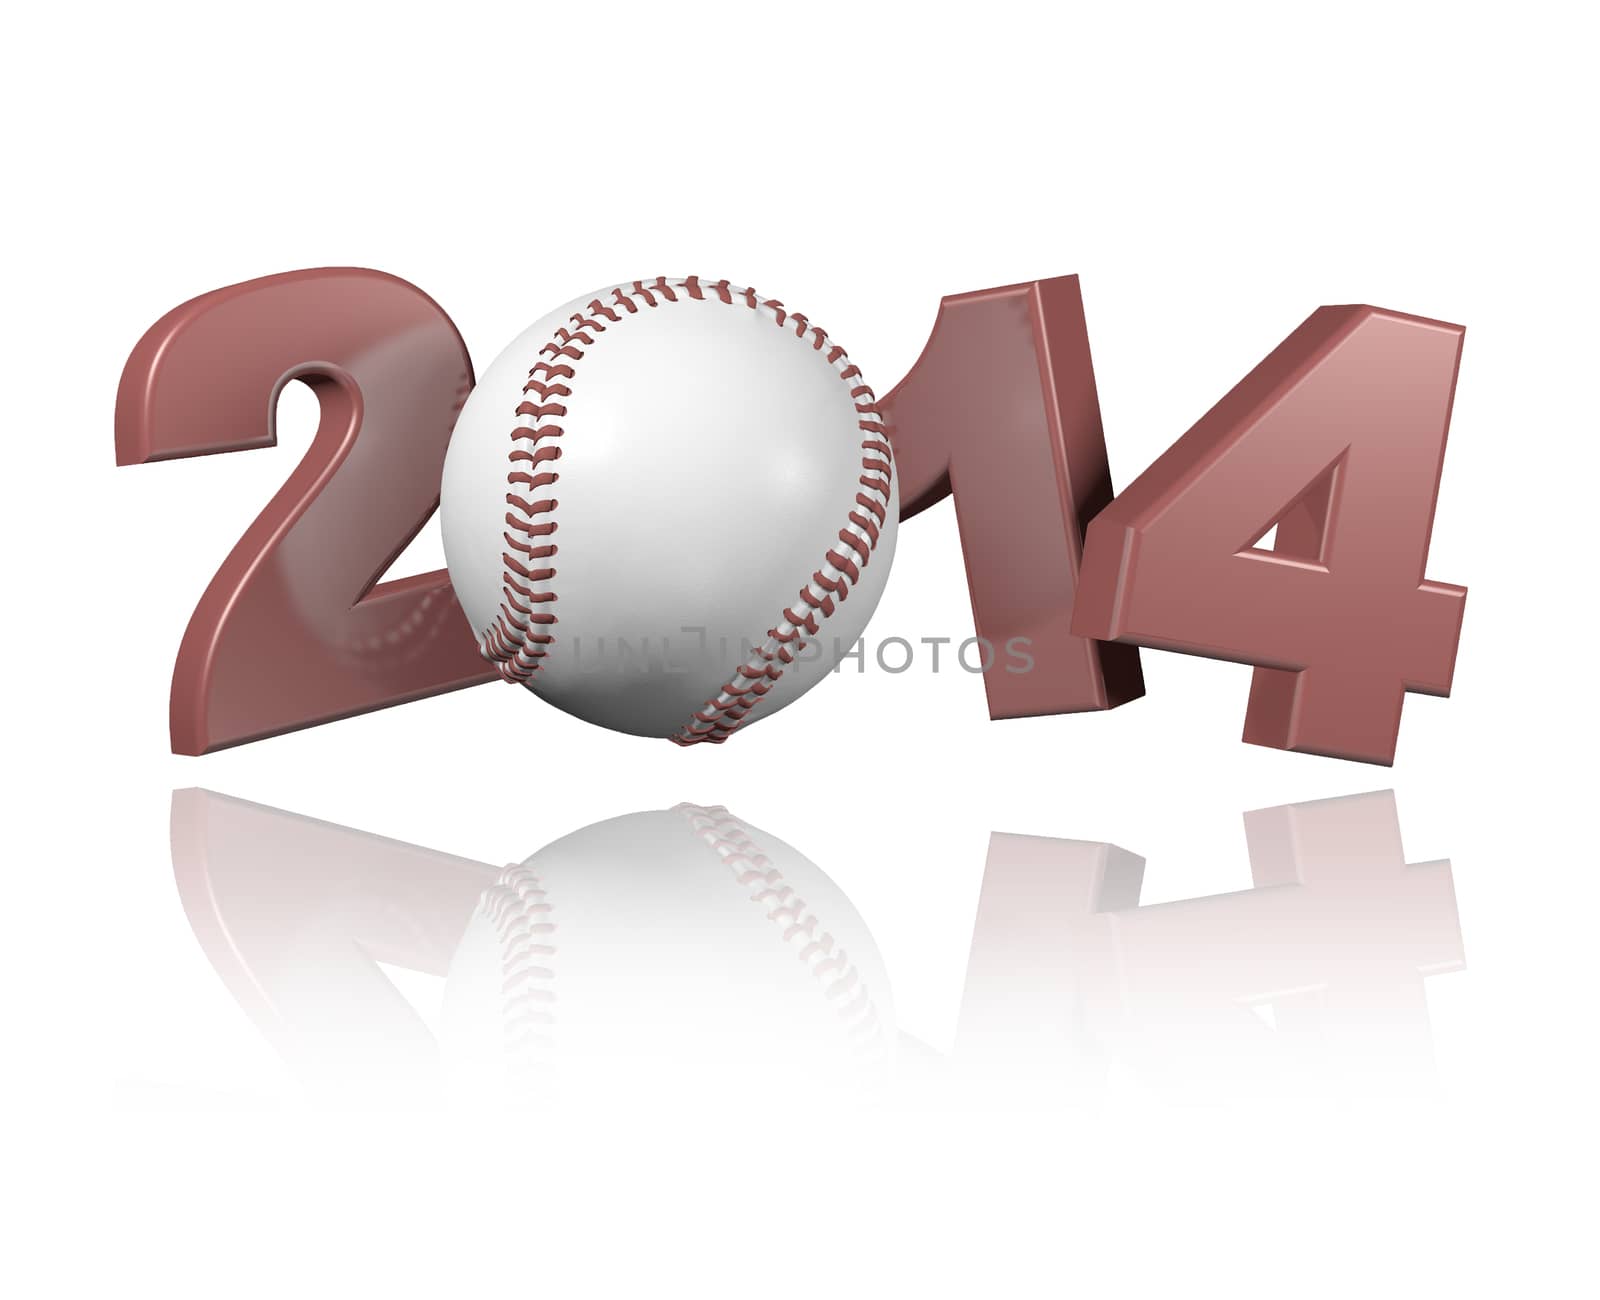 Baseball 2014 design with a white Background